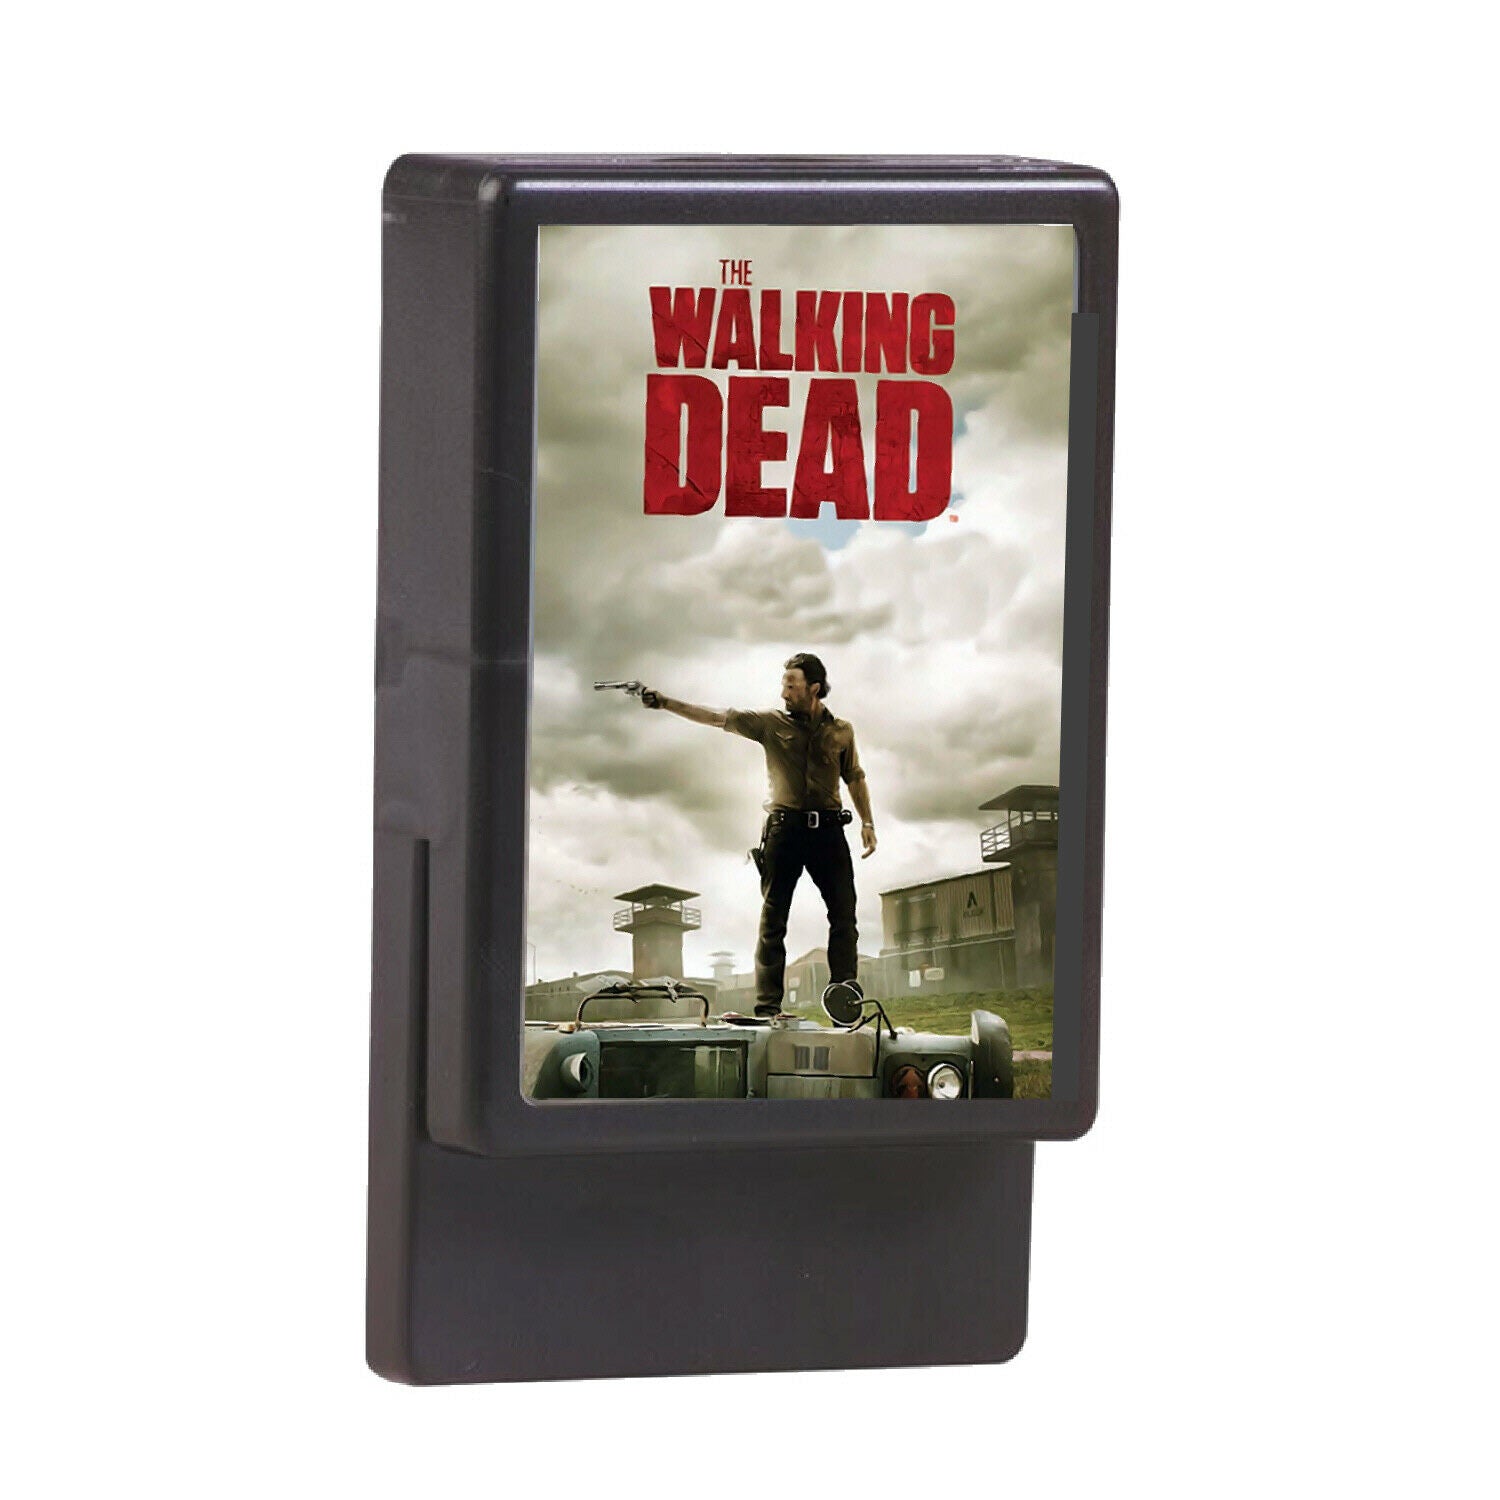 The Walking Dead Mini Poster Magnetic Display Clip Big 4 inches